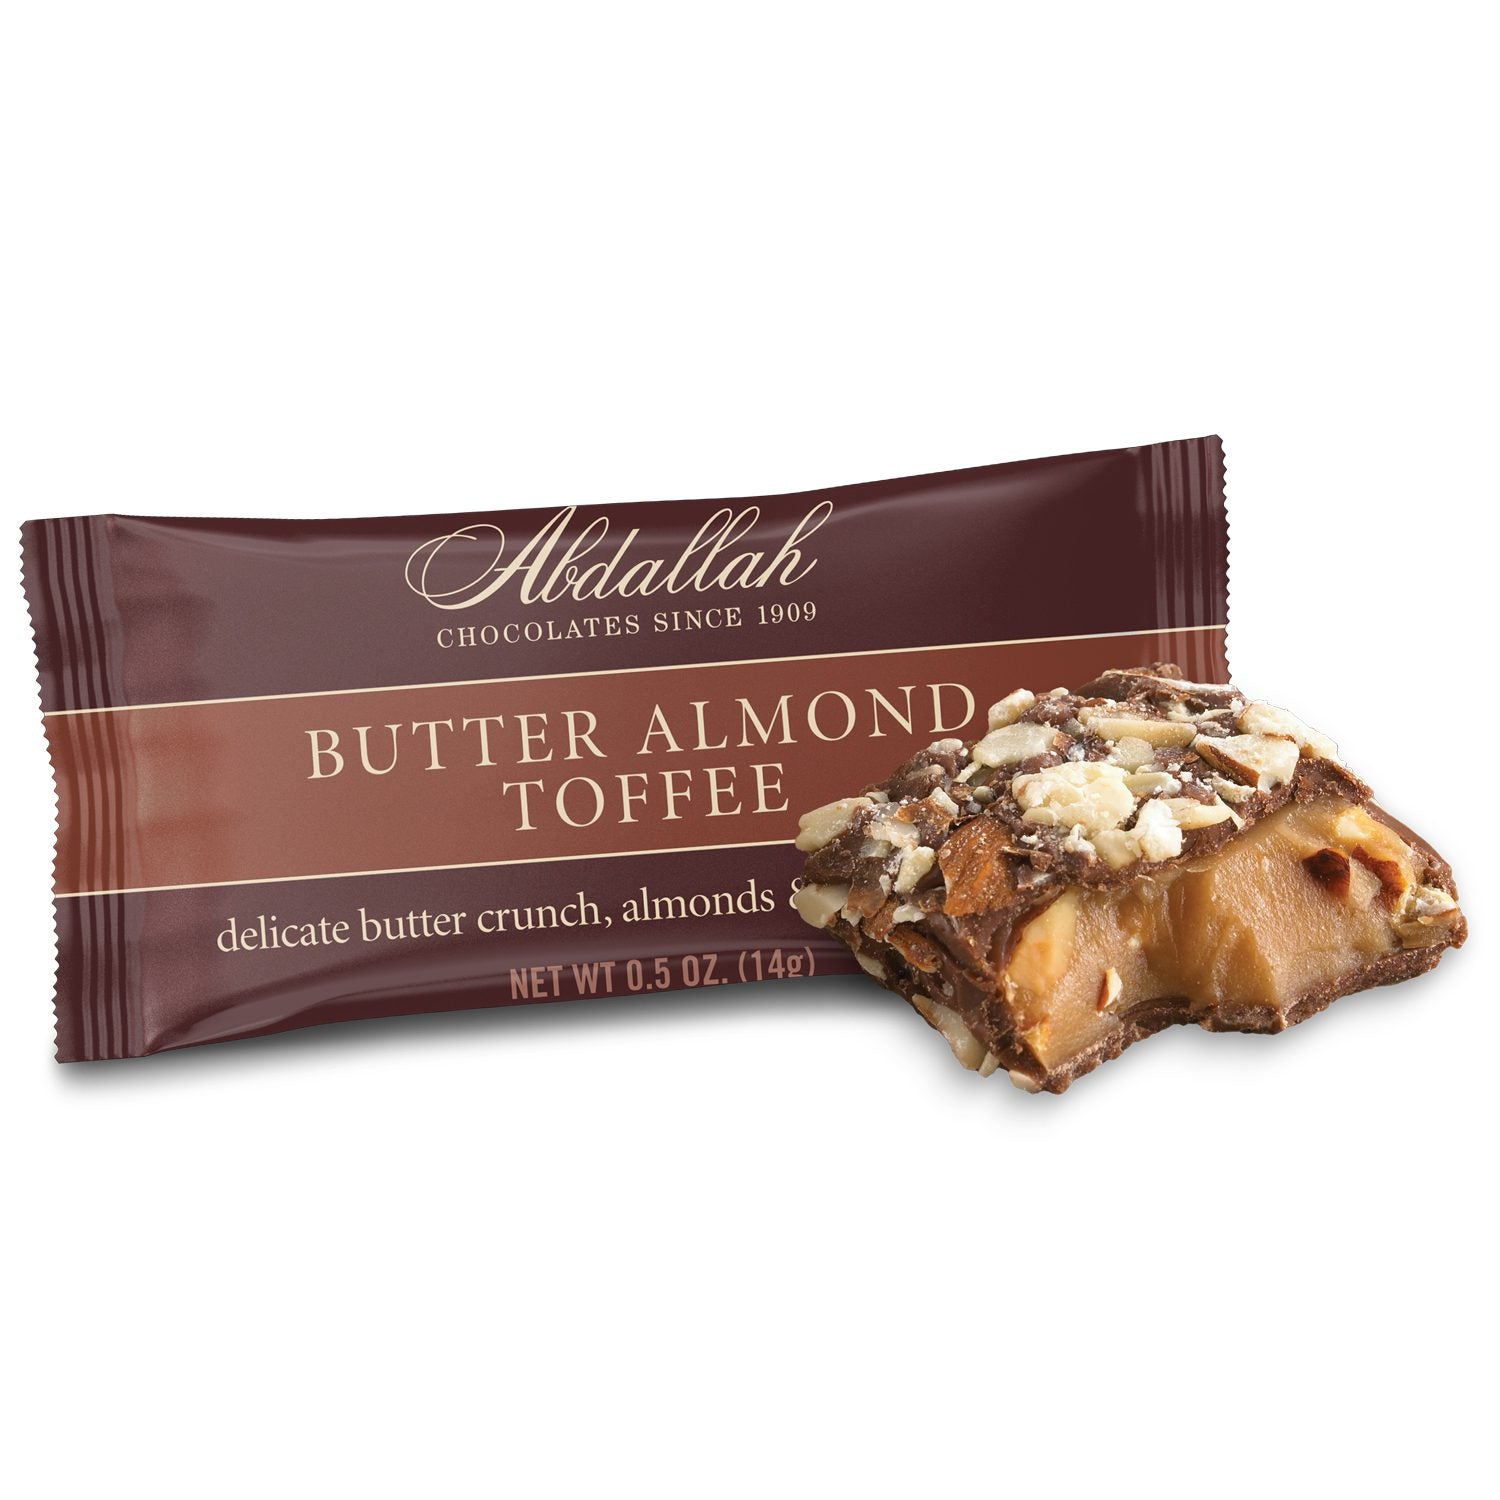 Butter Almond Toffee - Singles Impulse Abdallah Candies   